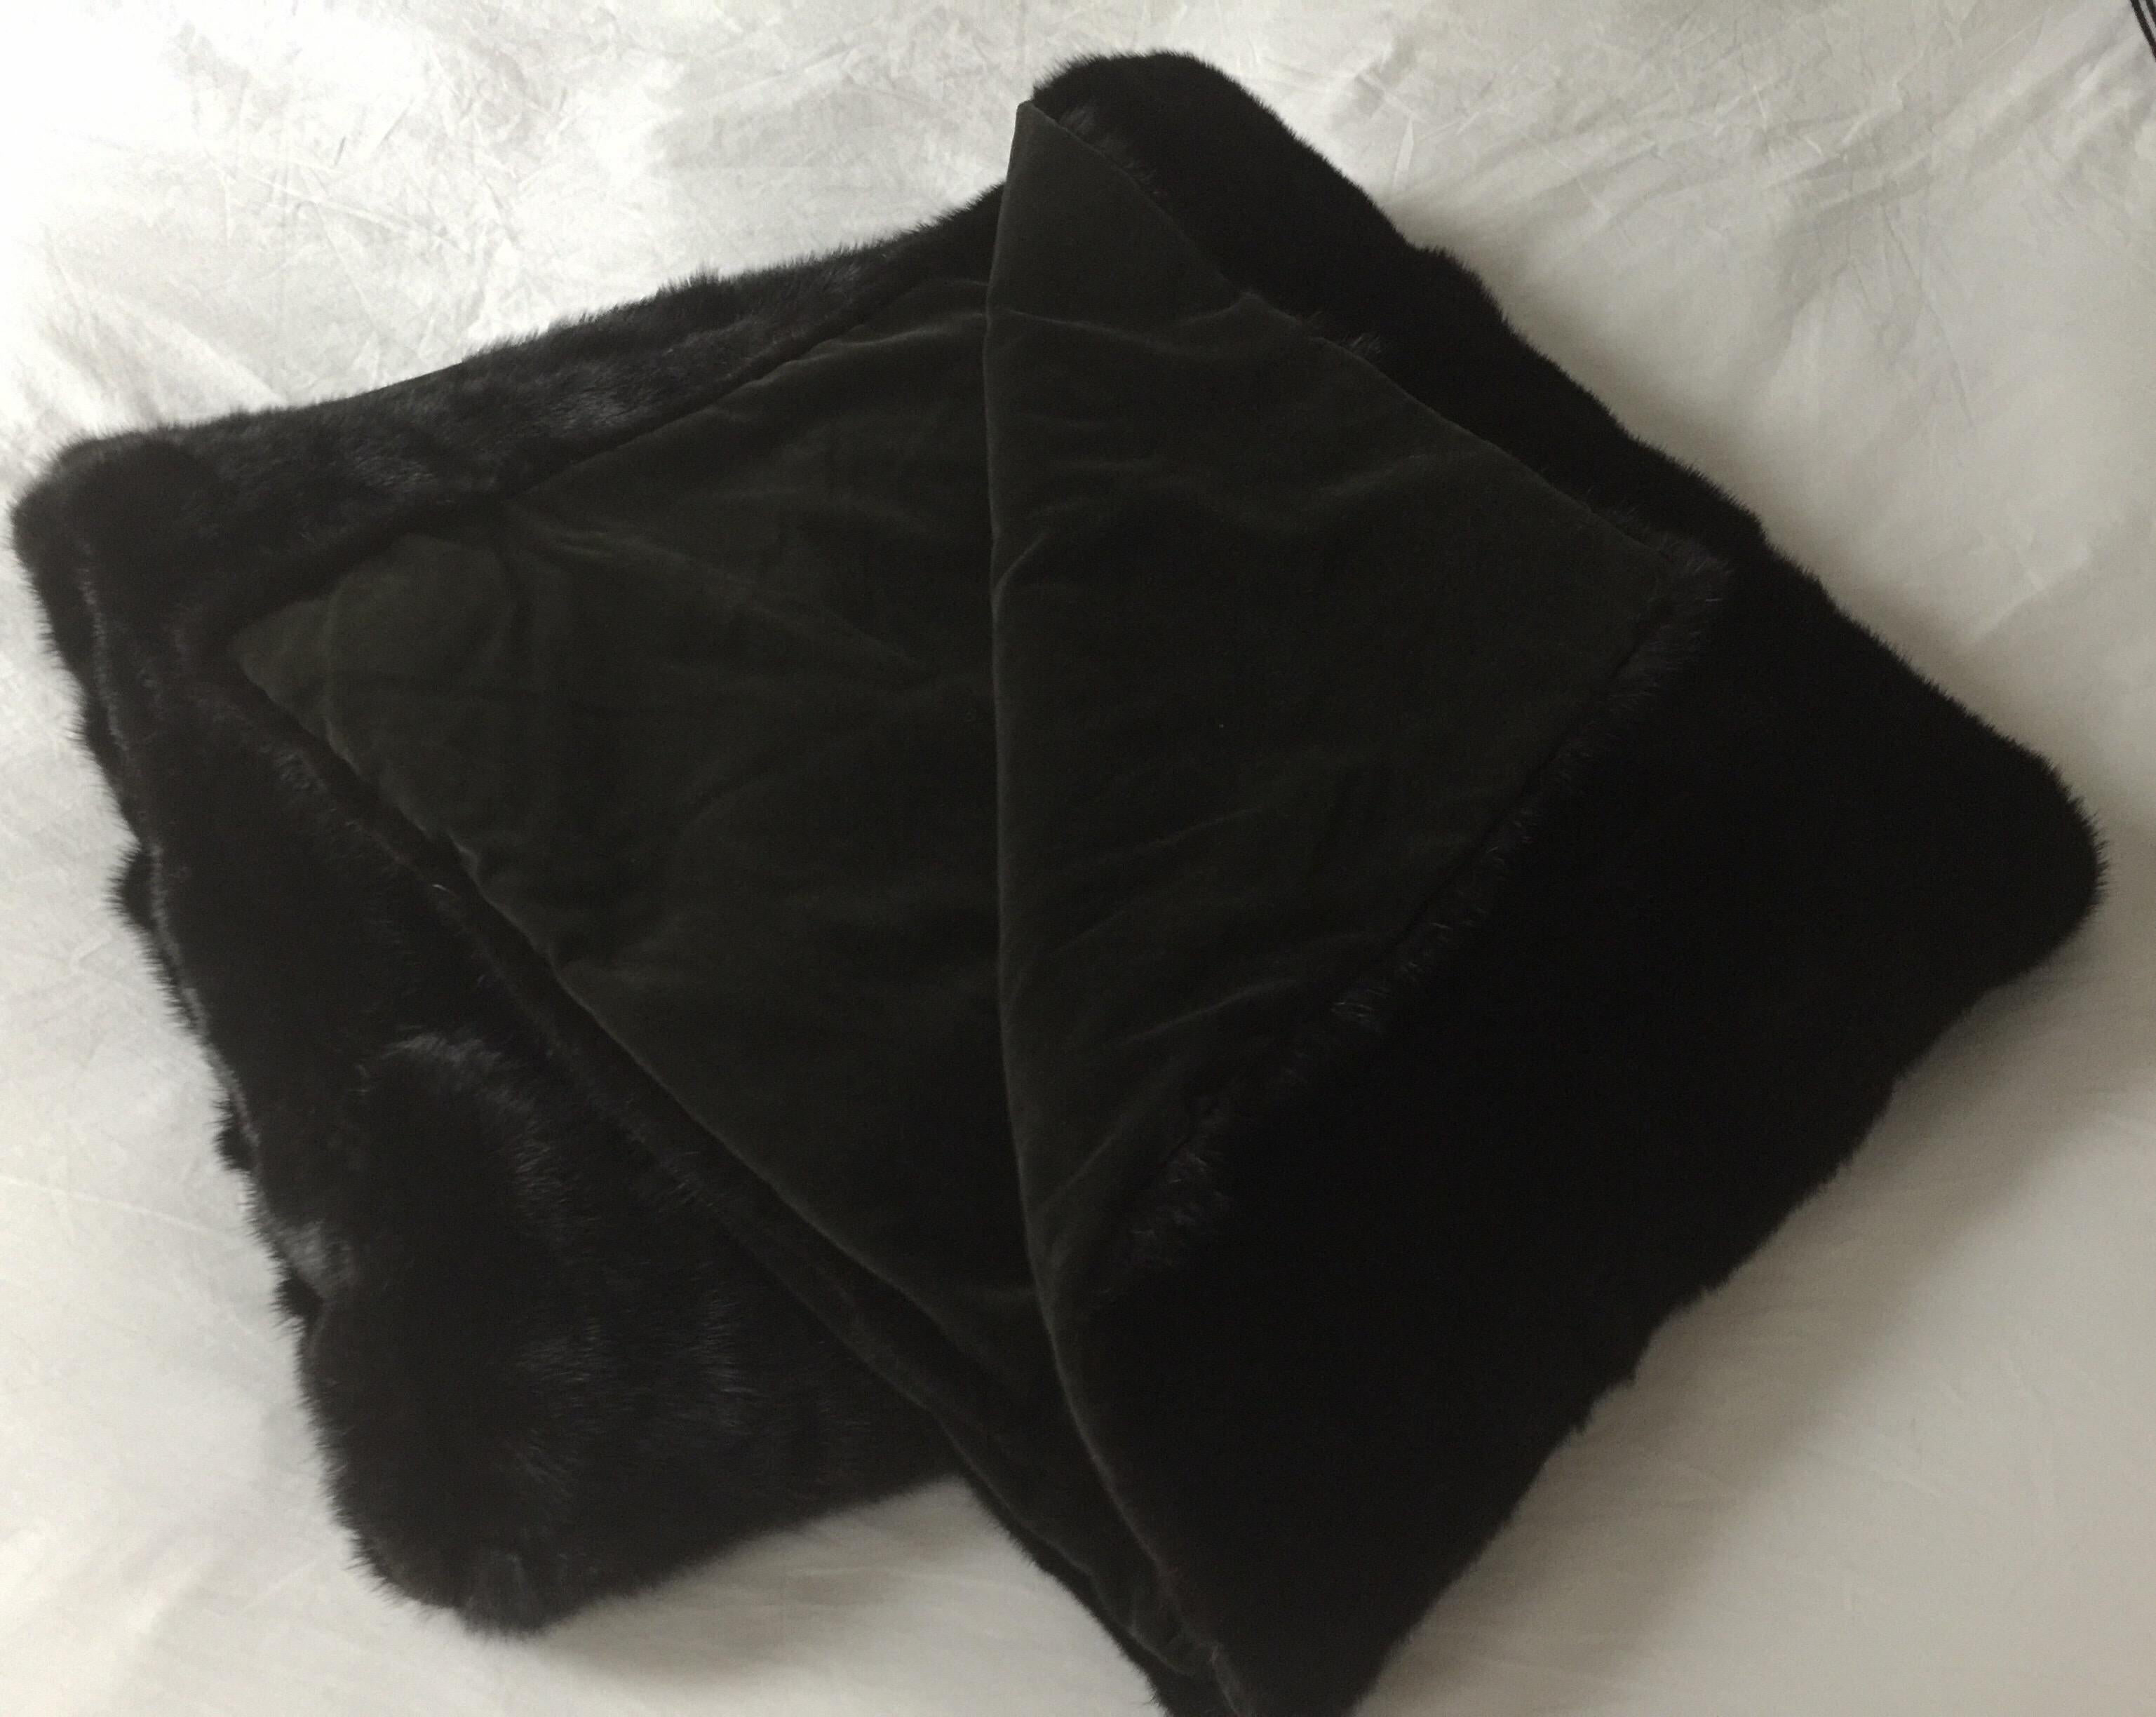 A custom mink fur throw blanket. Lined in olive green cotton velvet. Dark brown. Made in USA, circa 2010.
Measures: 84 inches x 48 inches.